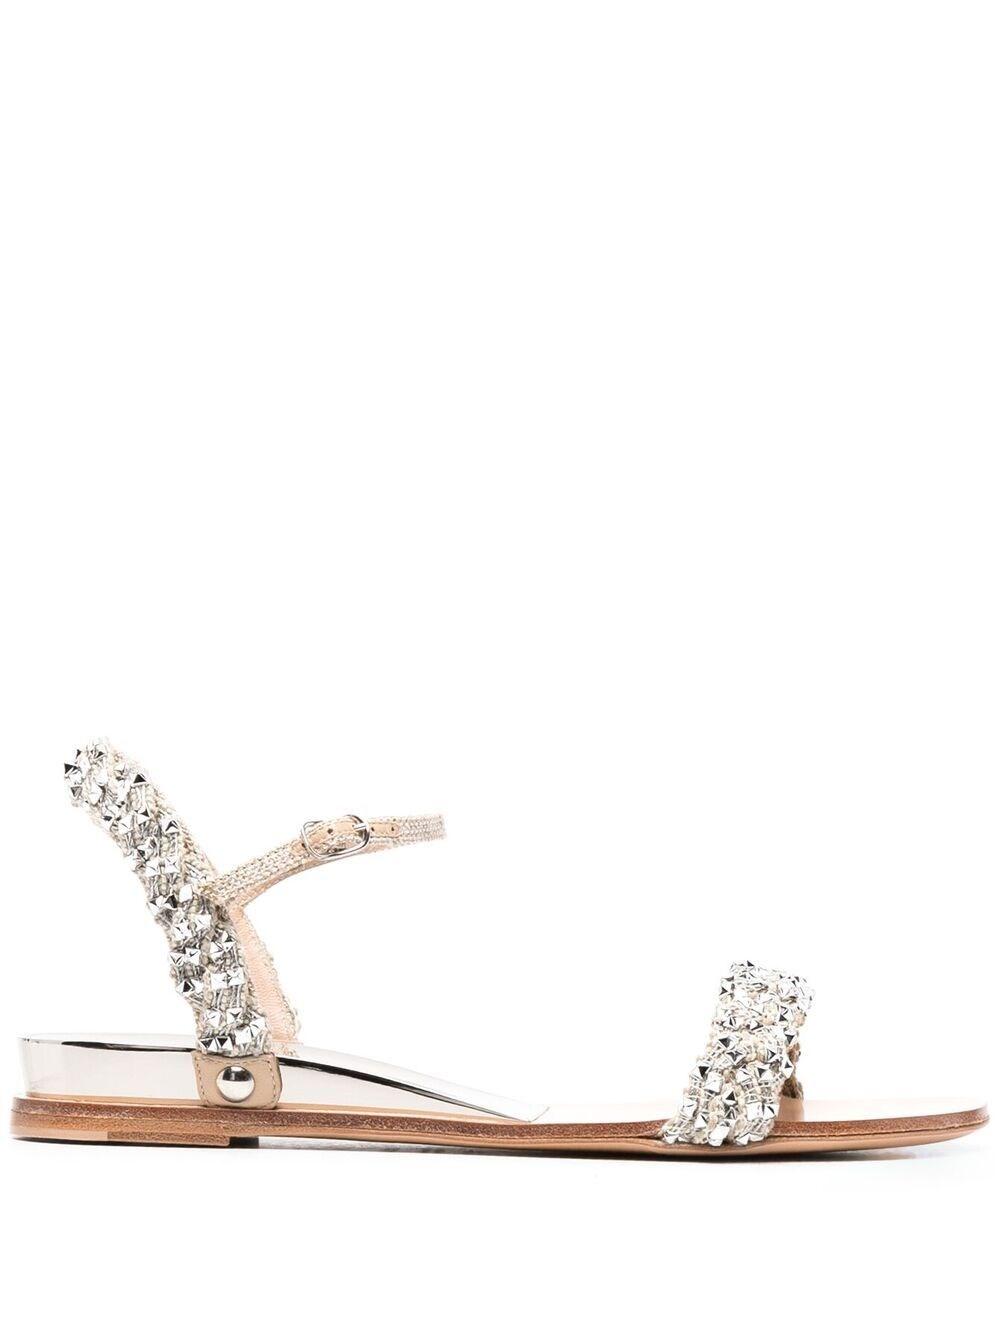 Casadei Woven Stud-strap Leather Sandals in Silver (Metallic) - Lyst